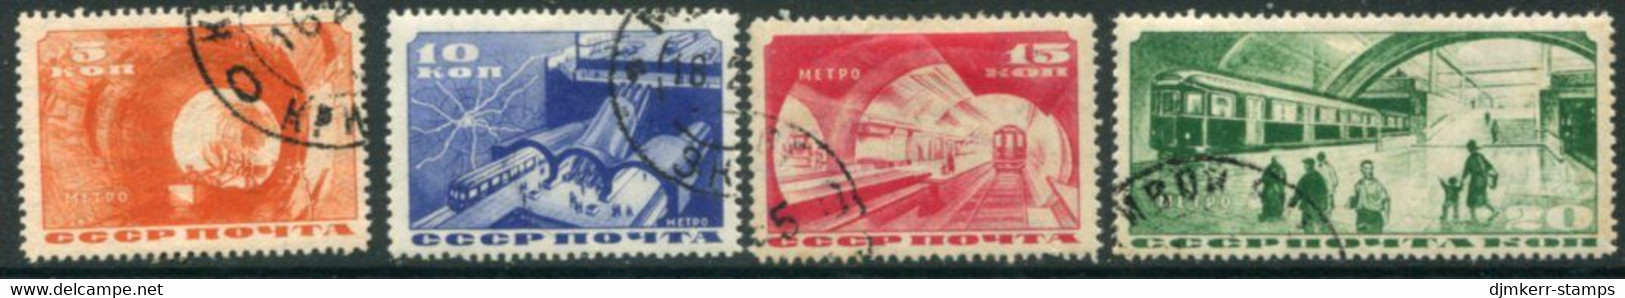 SOVIET UNION 1935 Opening Of Moscow Metro Set, Fine Used.  Michel 509-12 - Usados